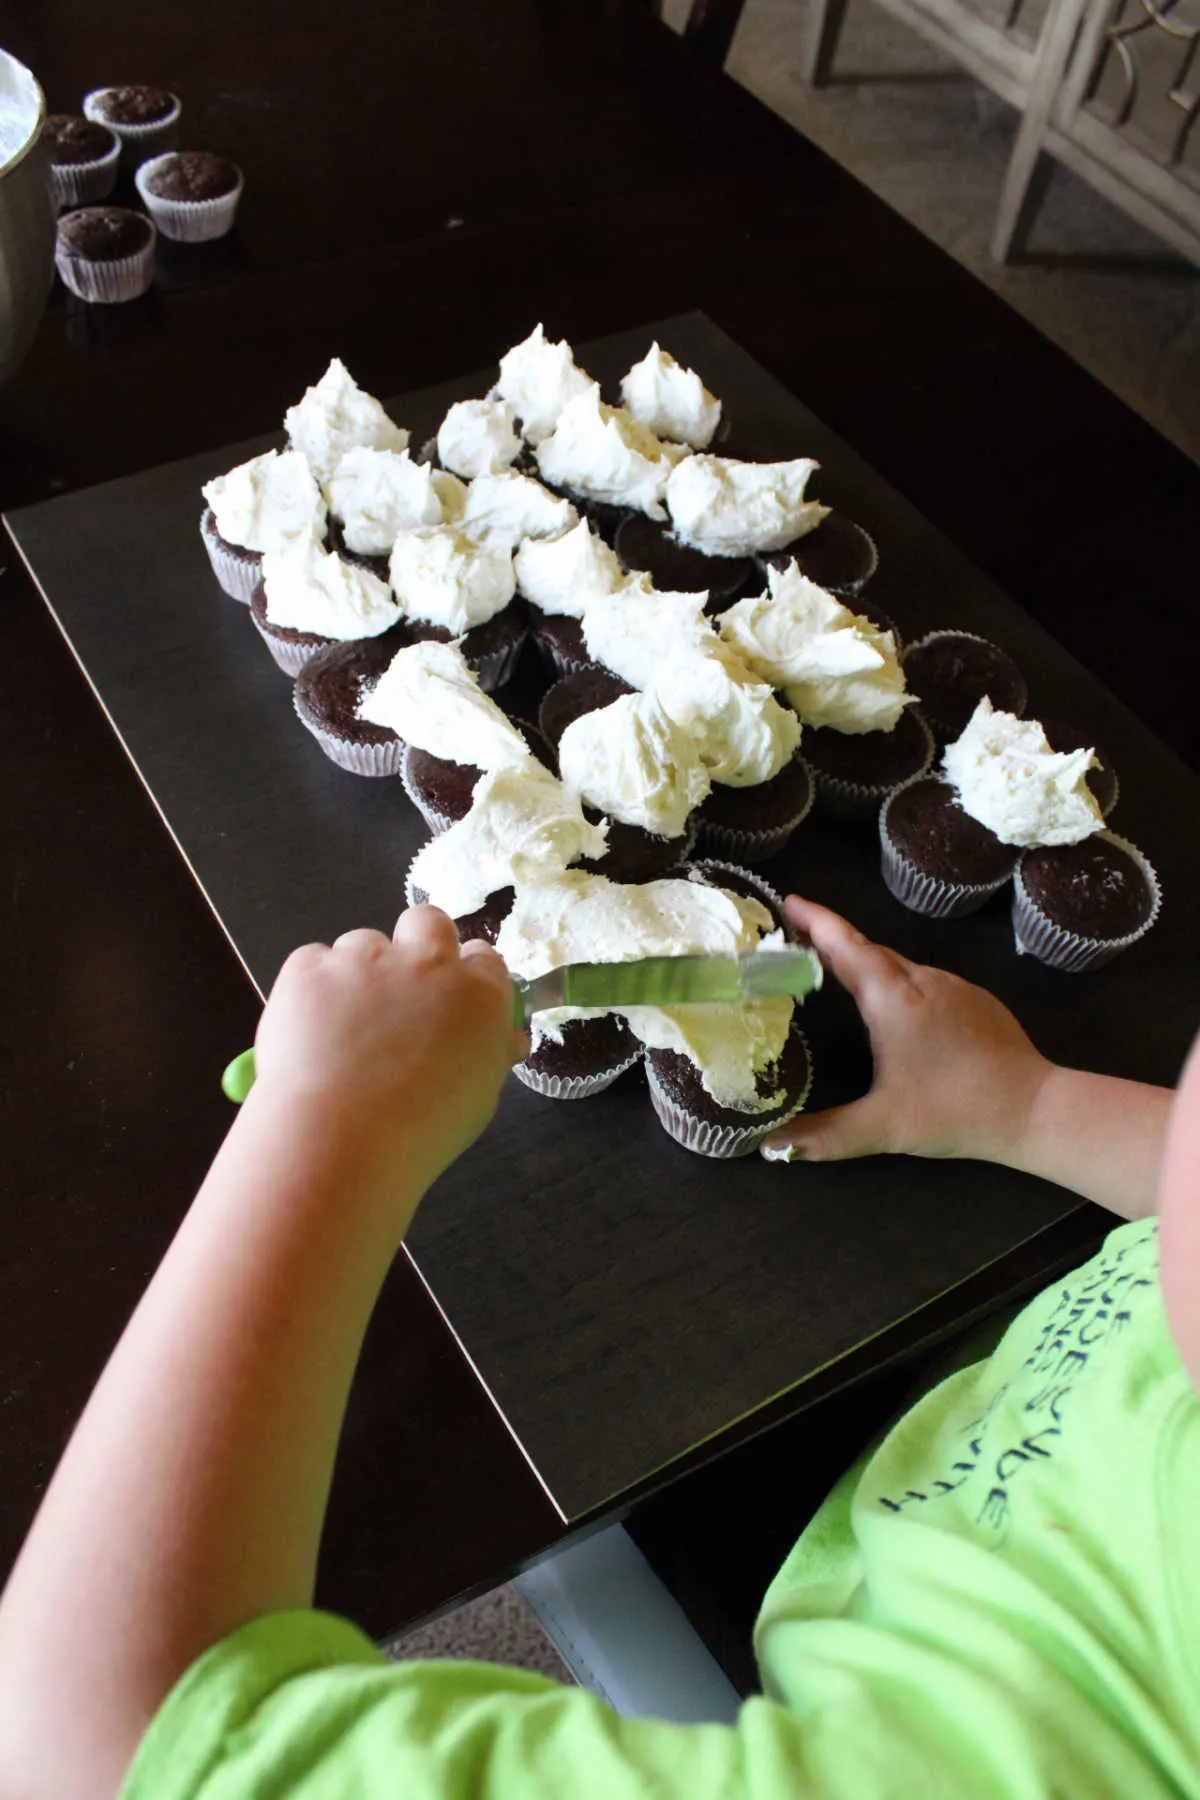 Starting to spread out scoops of frosting over arranged cupcakes.